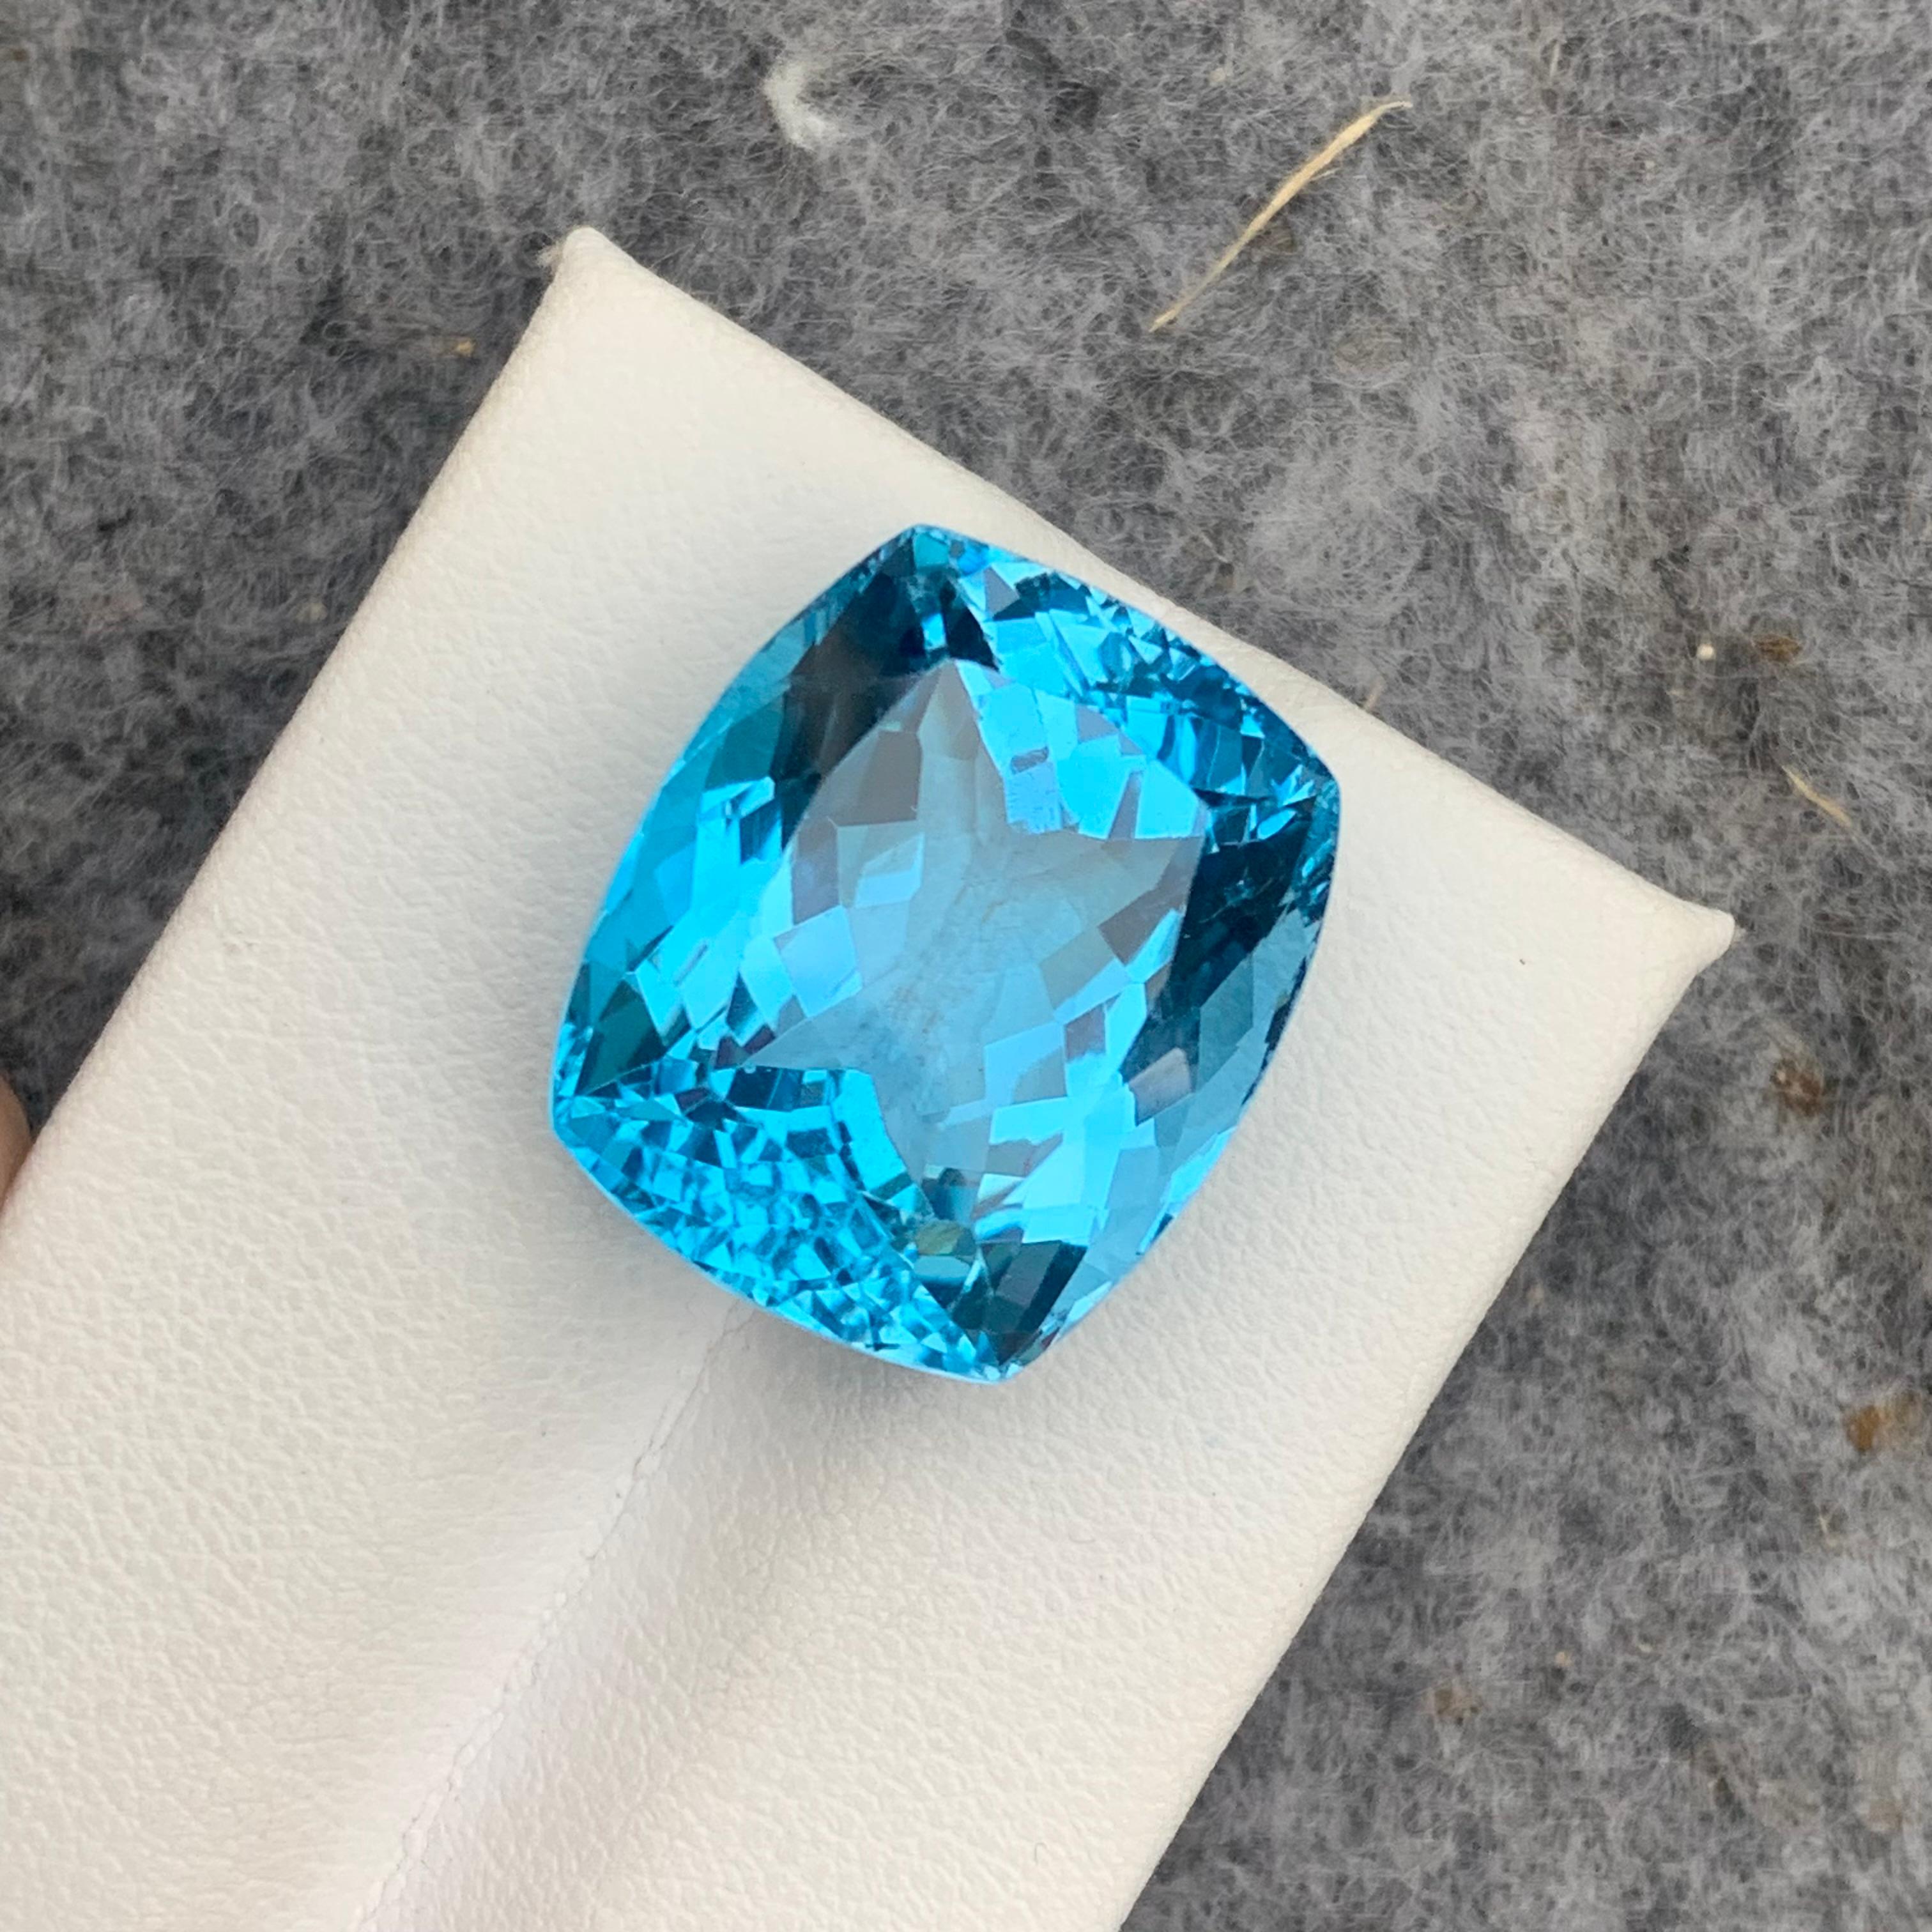 Gorgeous 31.10 Carat Loose Blue Topaz from Brazil Long Cushion Cut for Jewelry 1